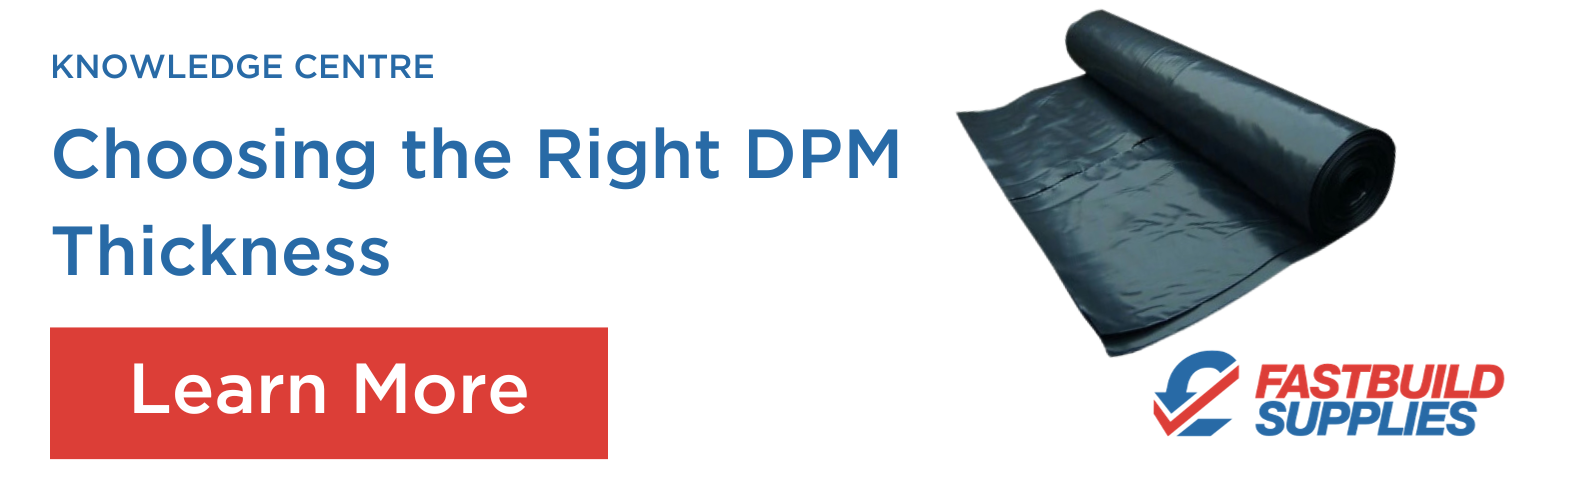 Choosing the right DPM thickness